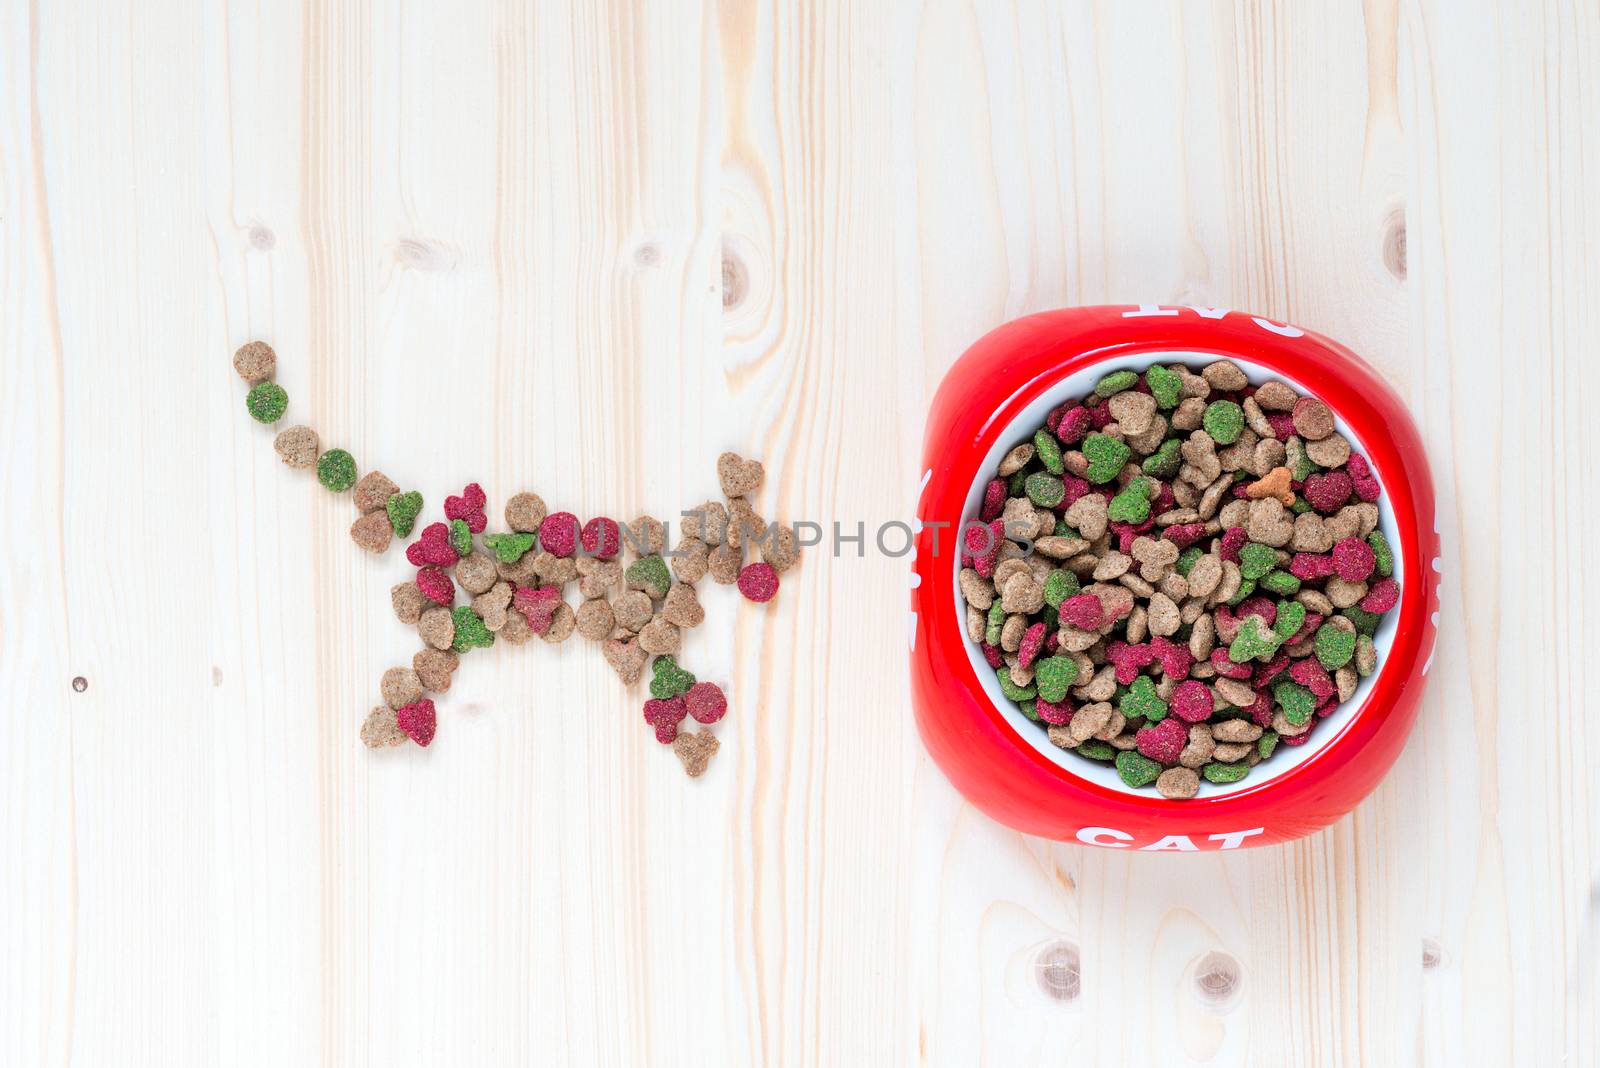 concept photo cat and dry food in bowl, top view close-up